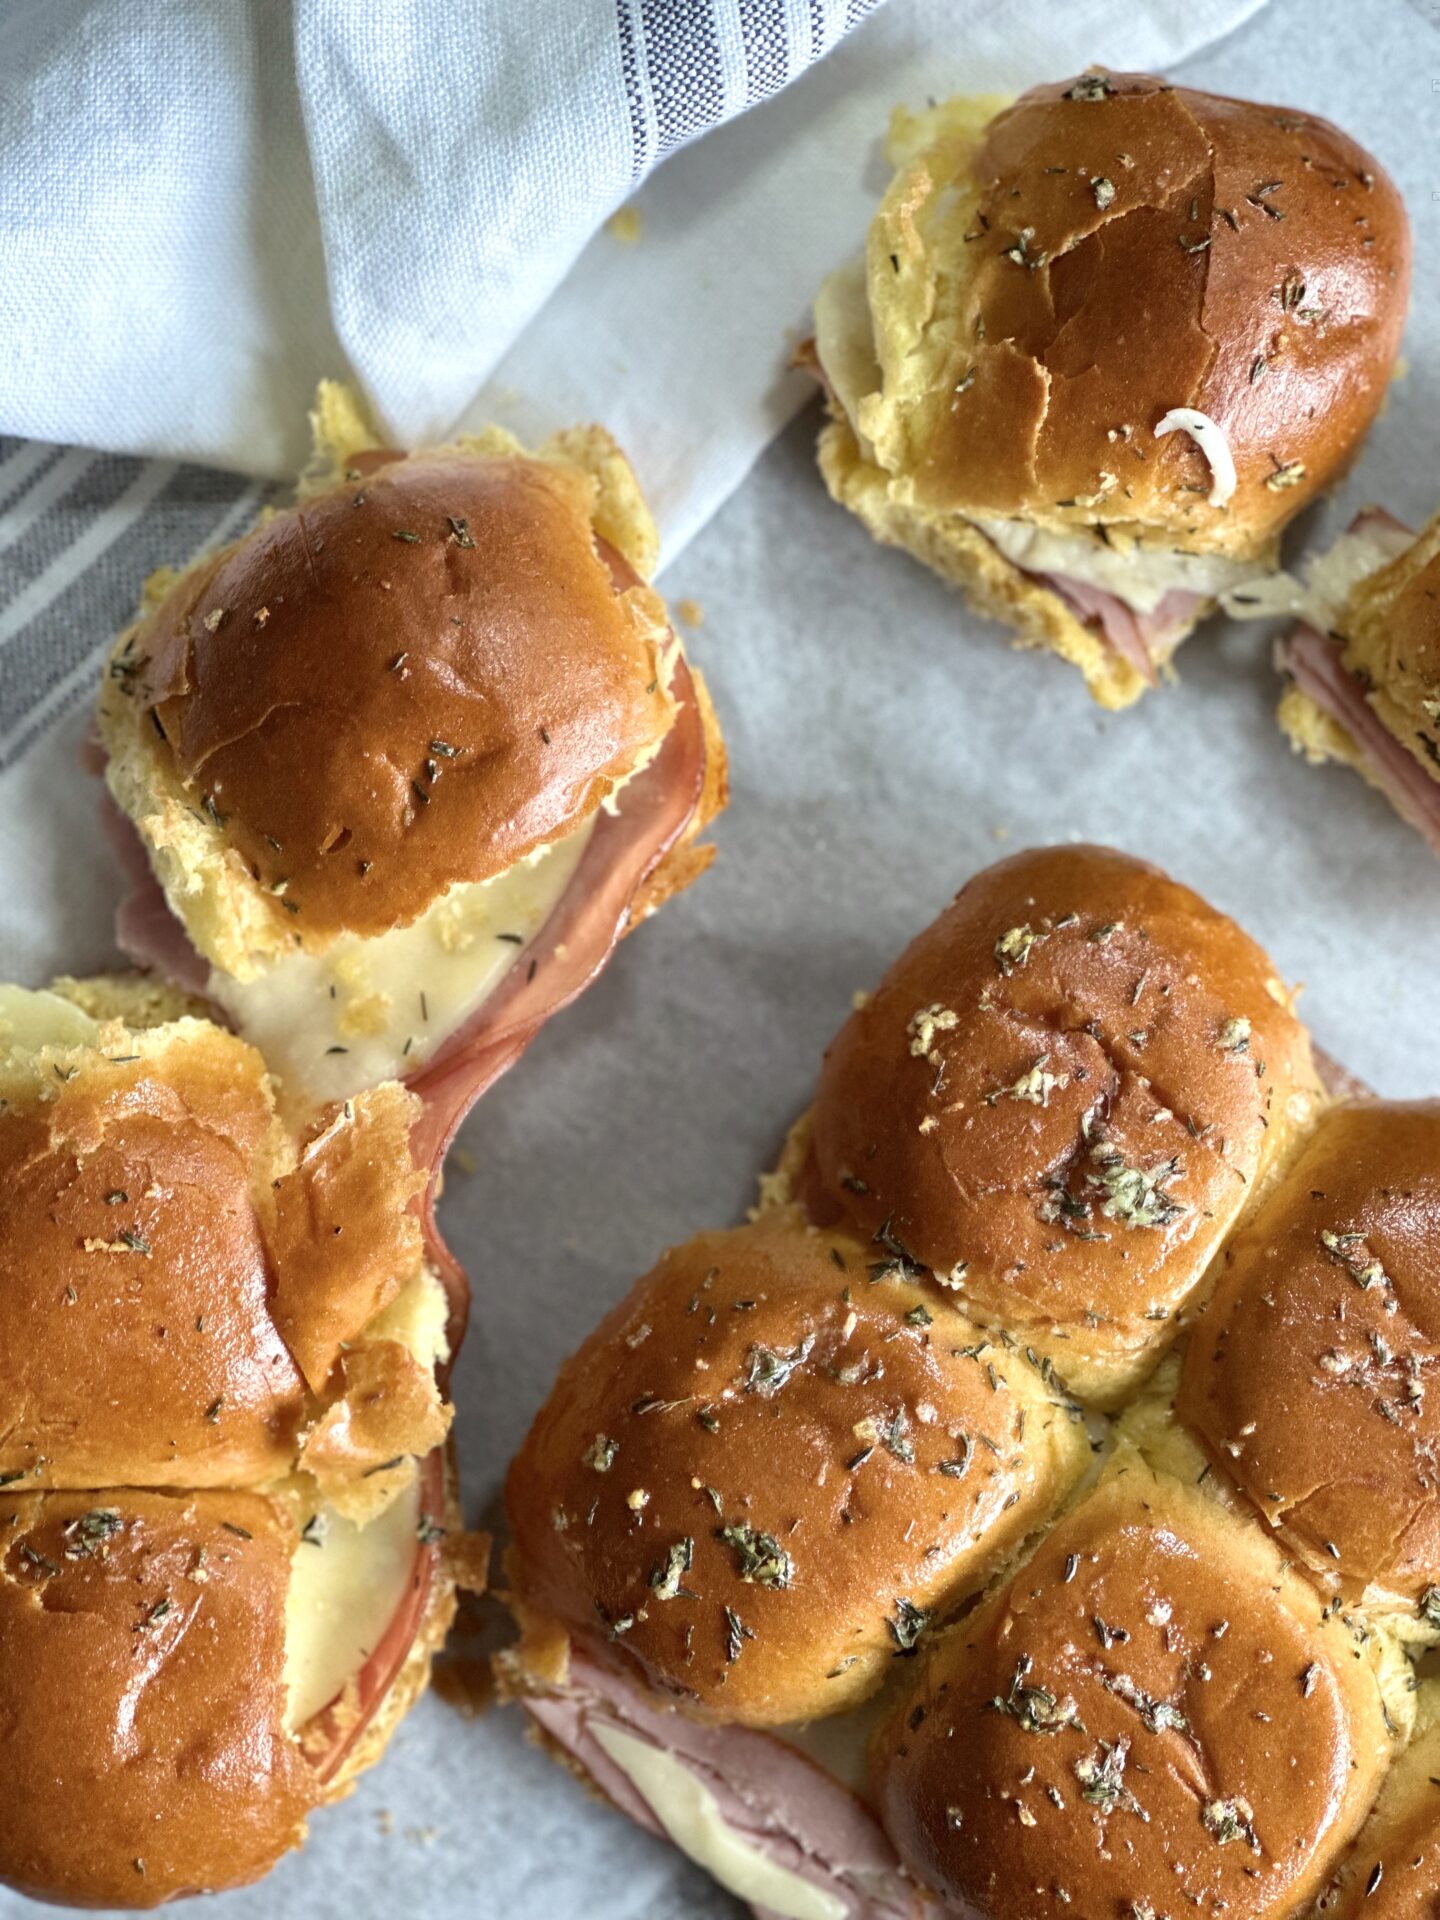 Hot and melty ham and cheese sliders topped with garlic butter, seen from above